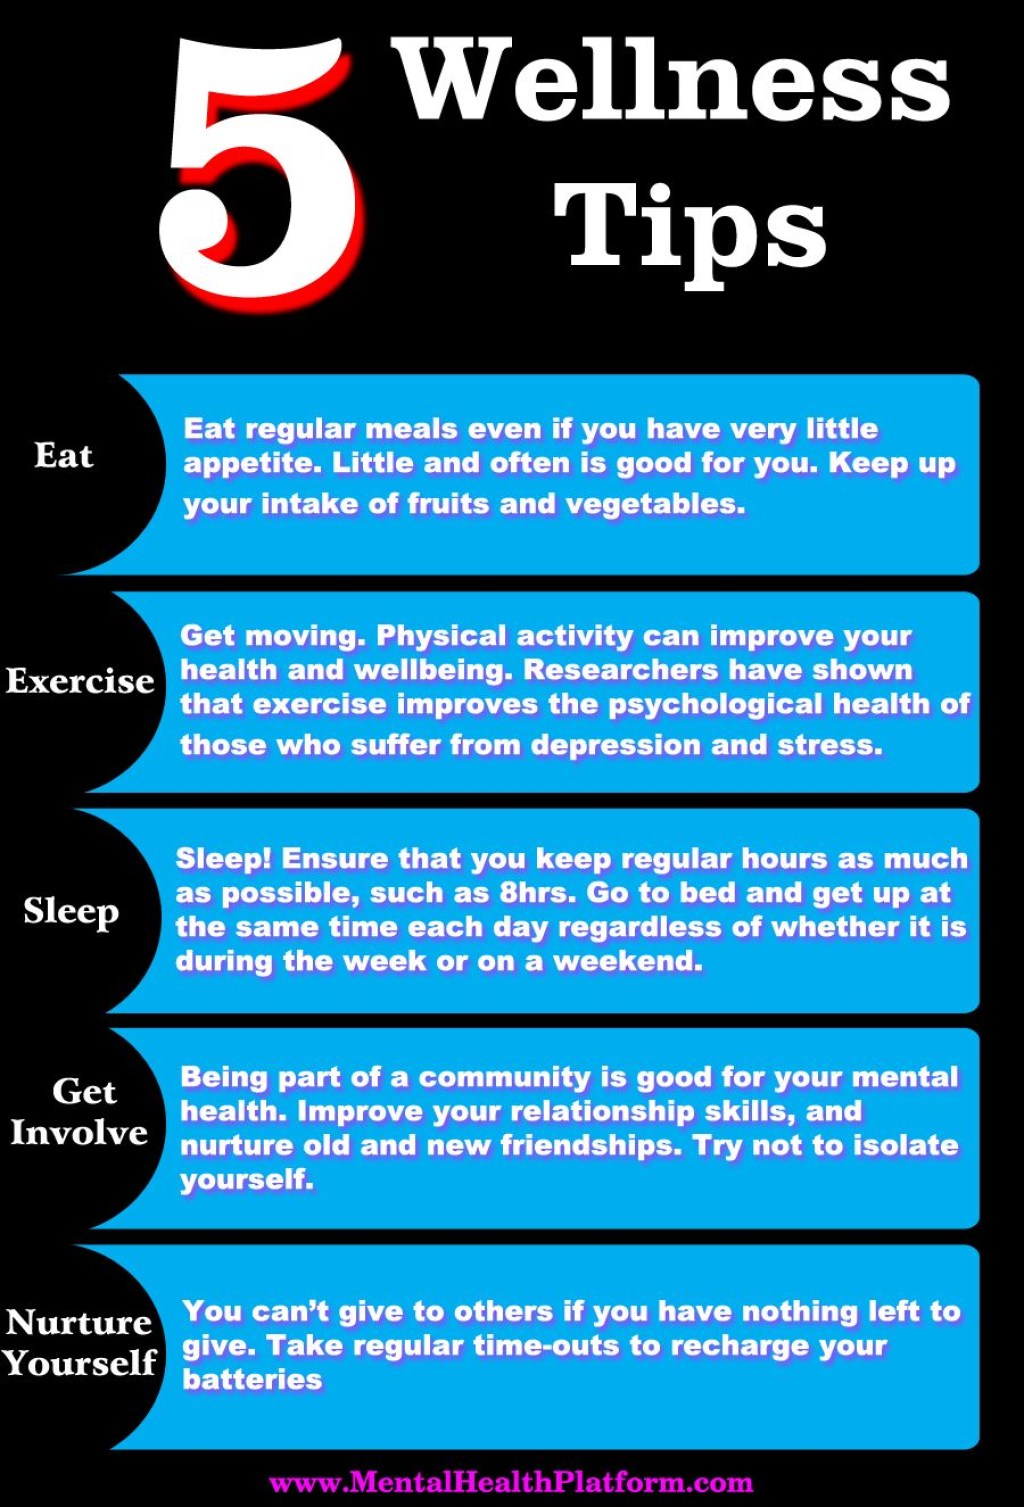 Picture of: Five Wellness Tips: #wellbeing #wellness #healthyliving